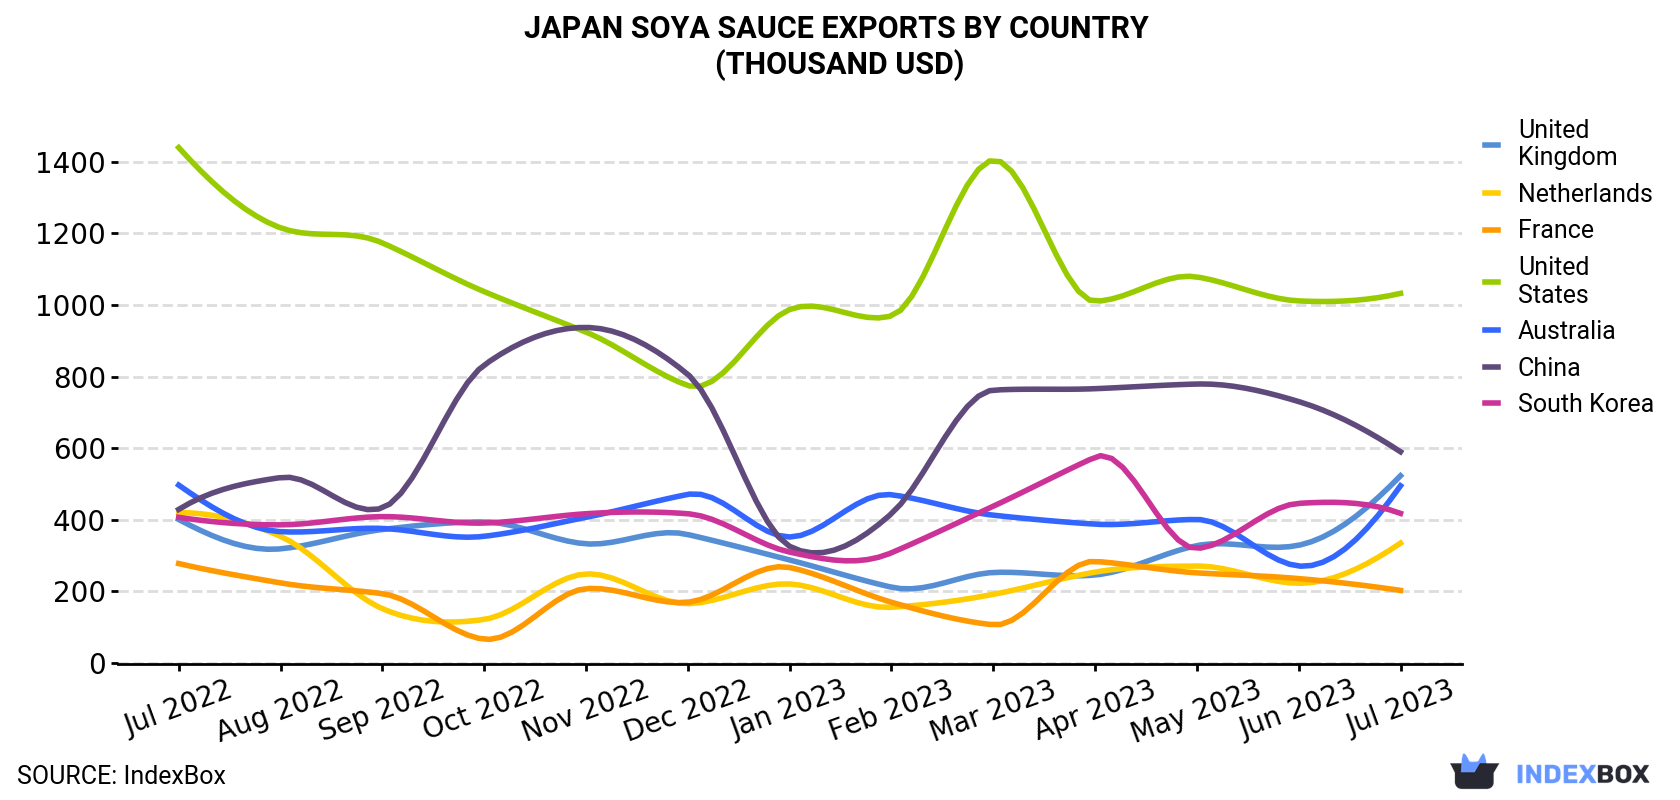 Japan Soya Sauce Exports By Country (Thousand USD)